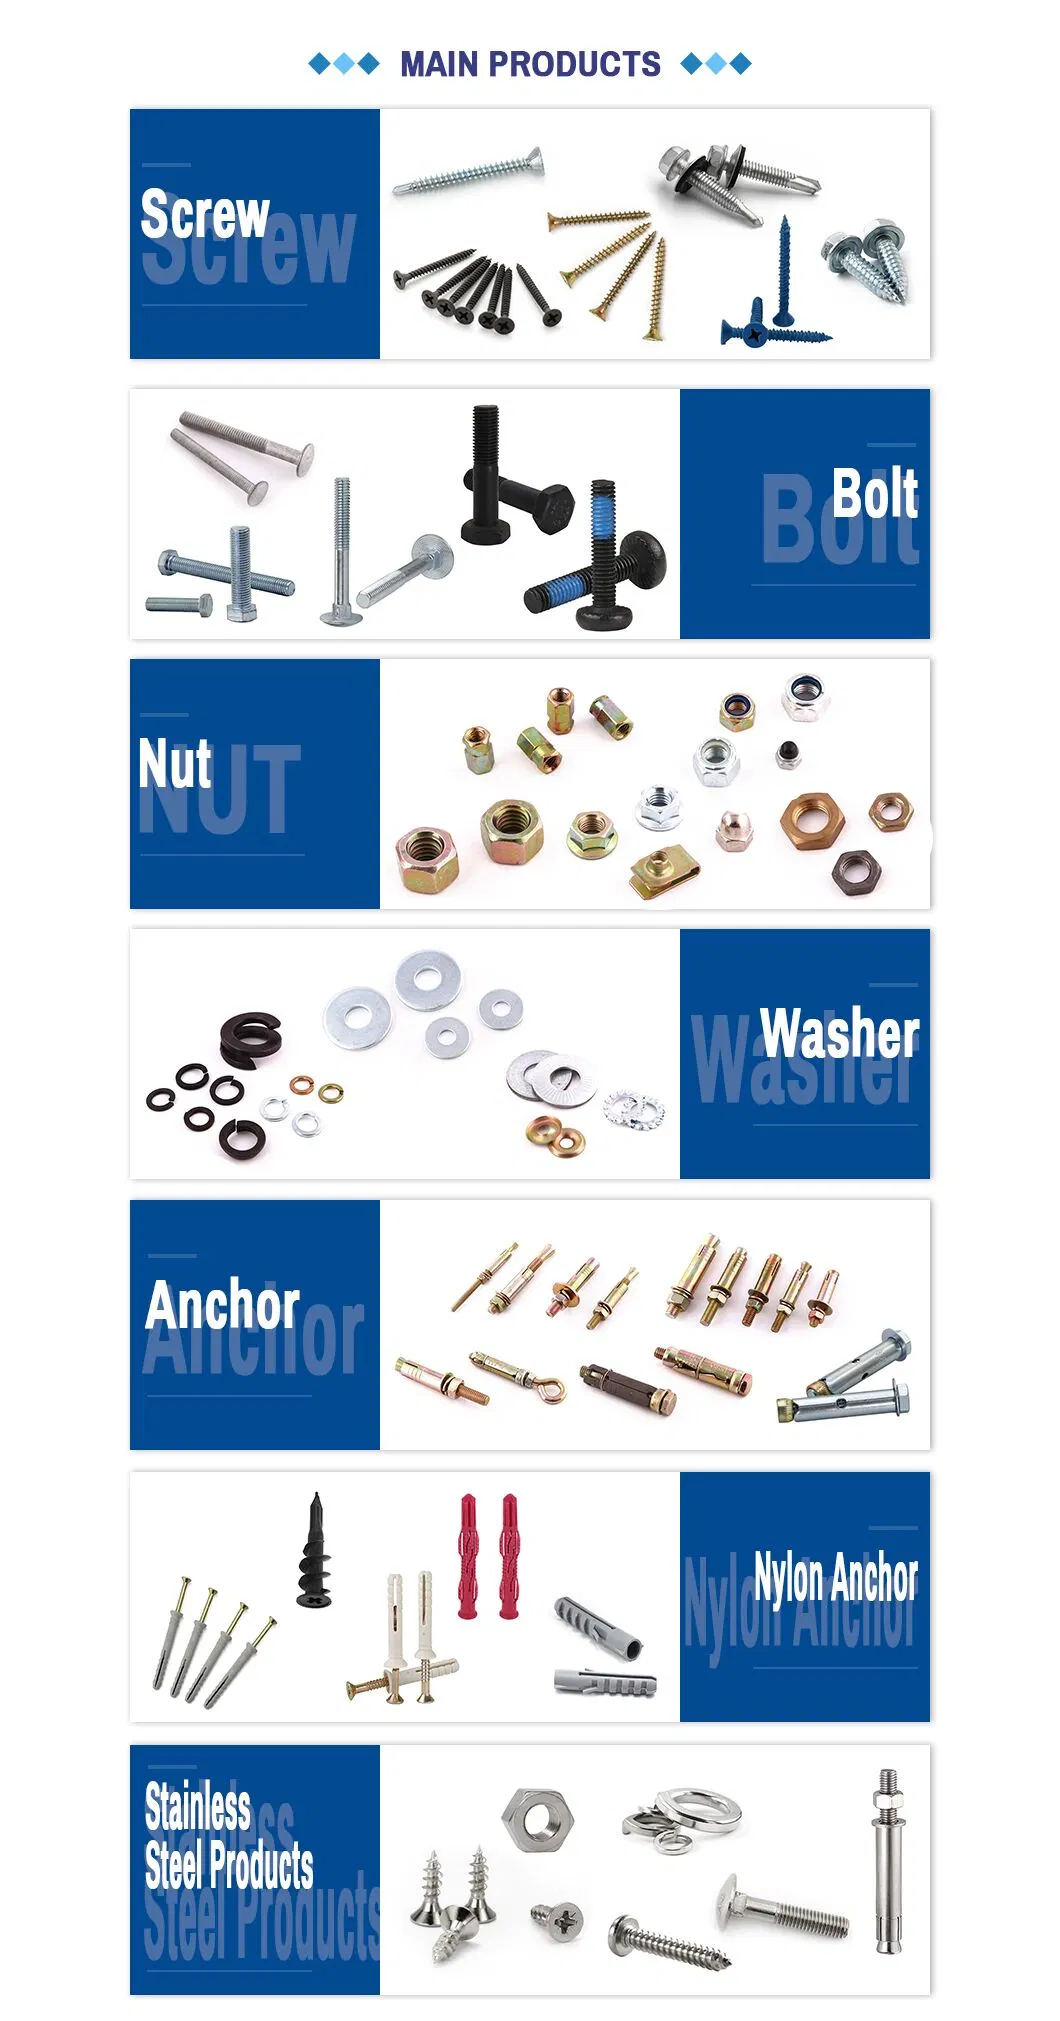 Support Express Sea Freight Land. Air Wafer Head Self Drilling Screw Nail